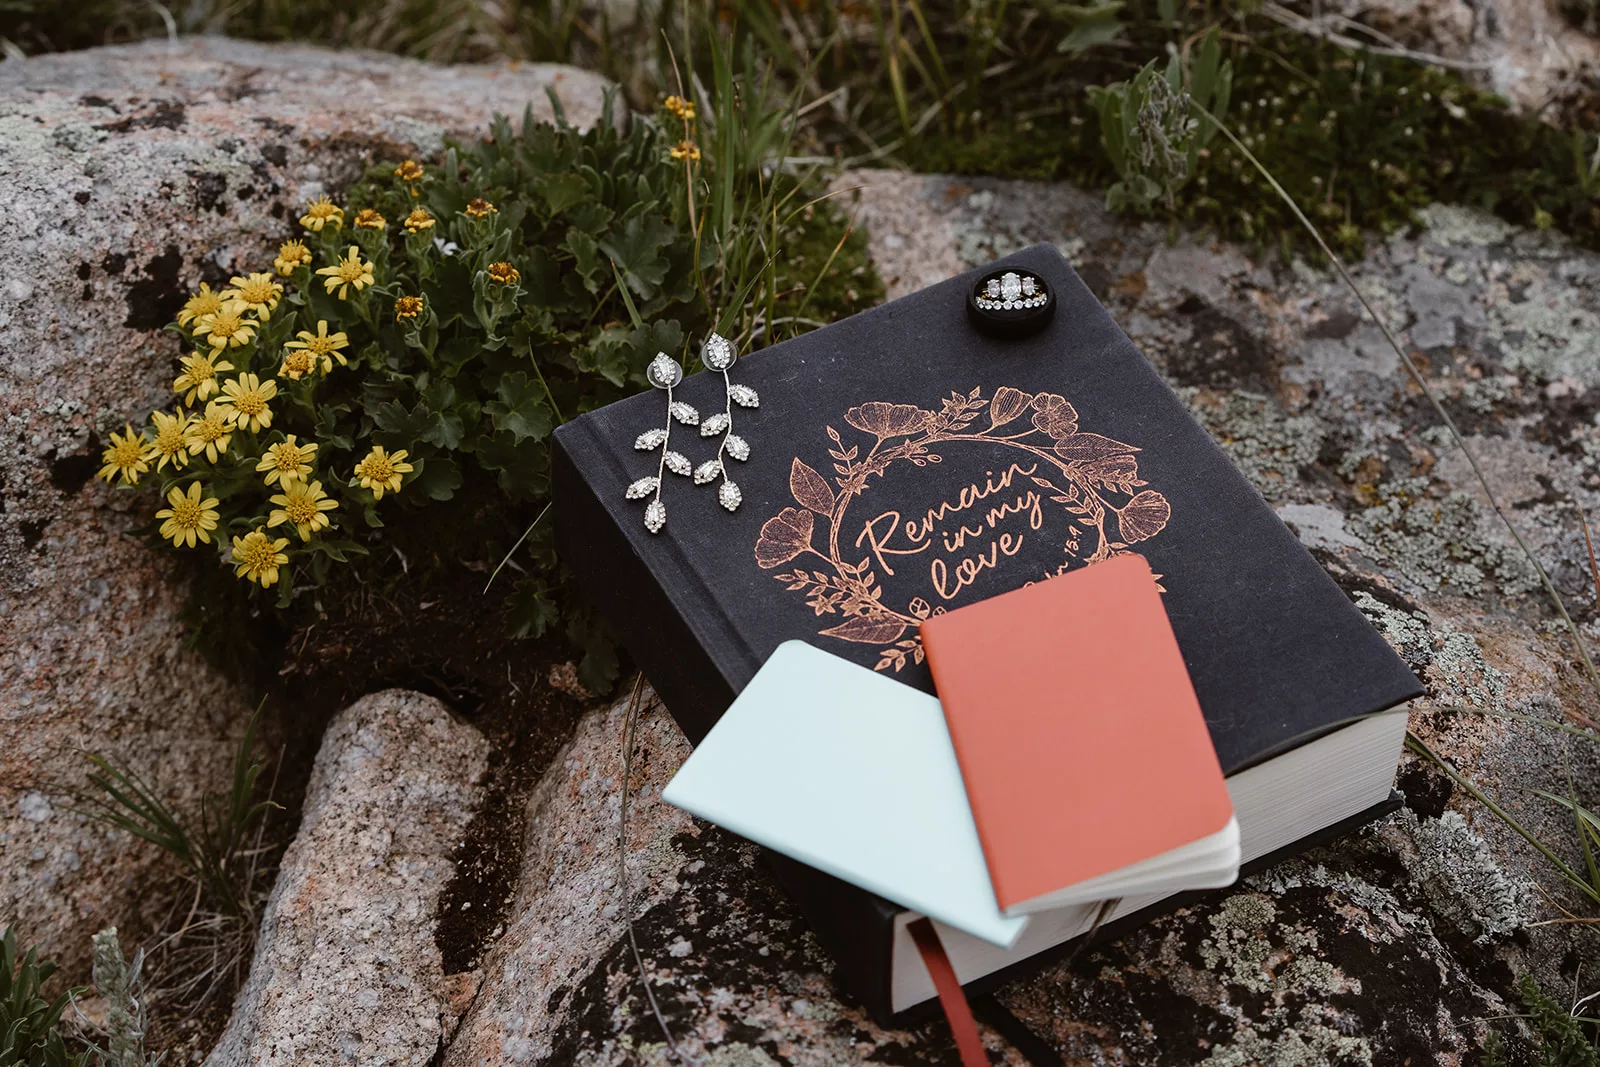 On a rock during a mountain elopement, a couple's vowsbooks await the elopement cermeony. 